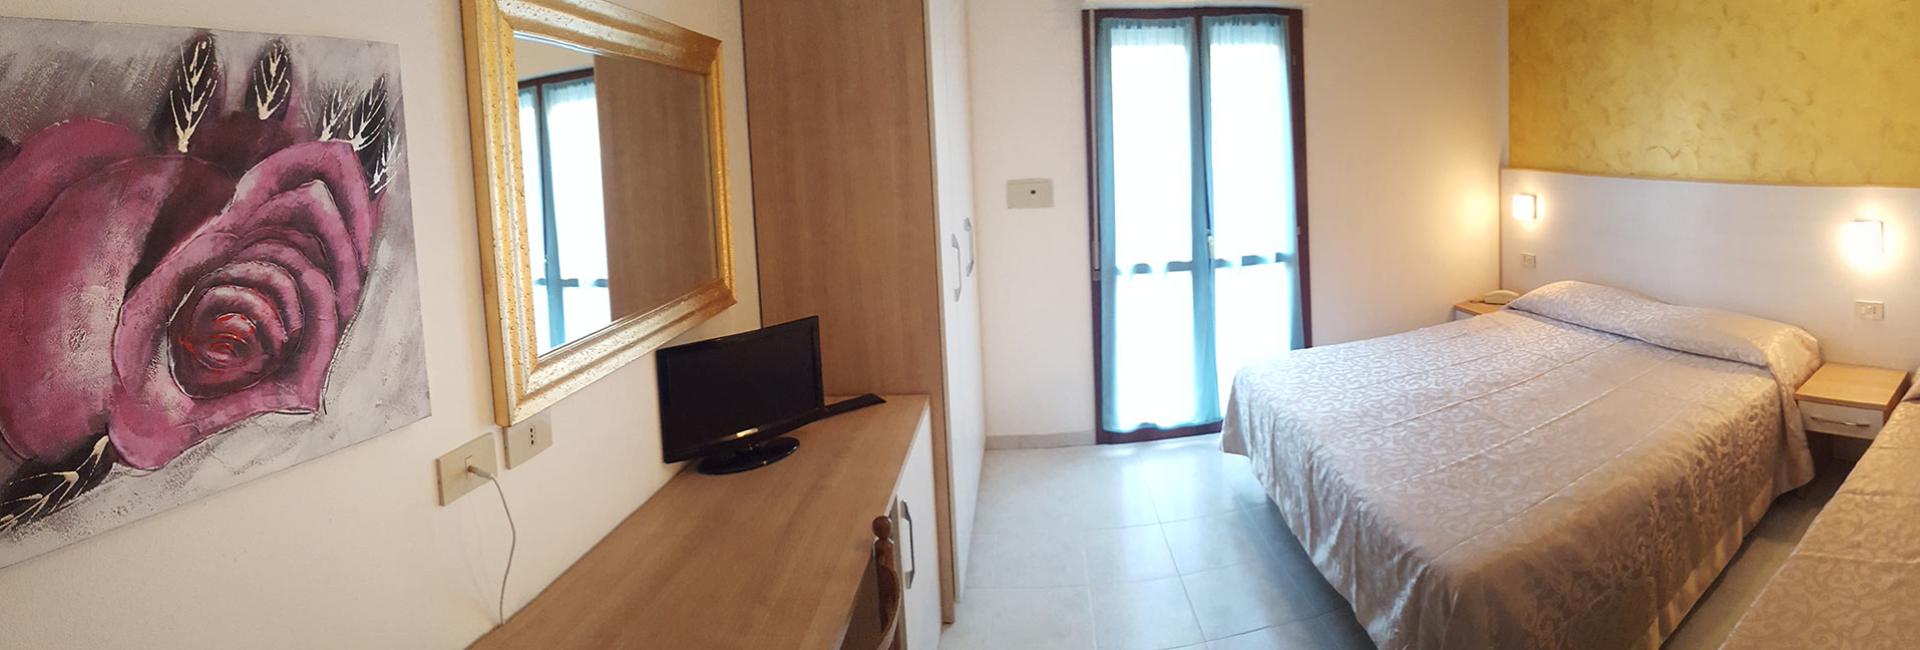 laurahotel it camere 001